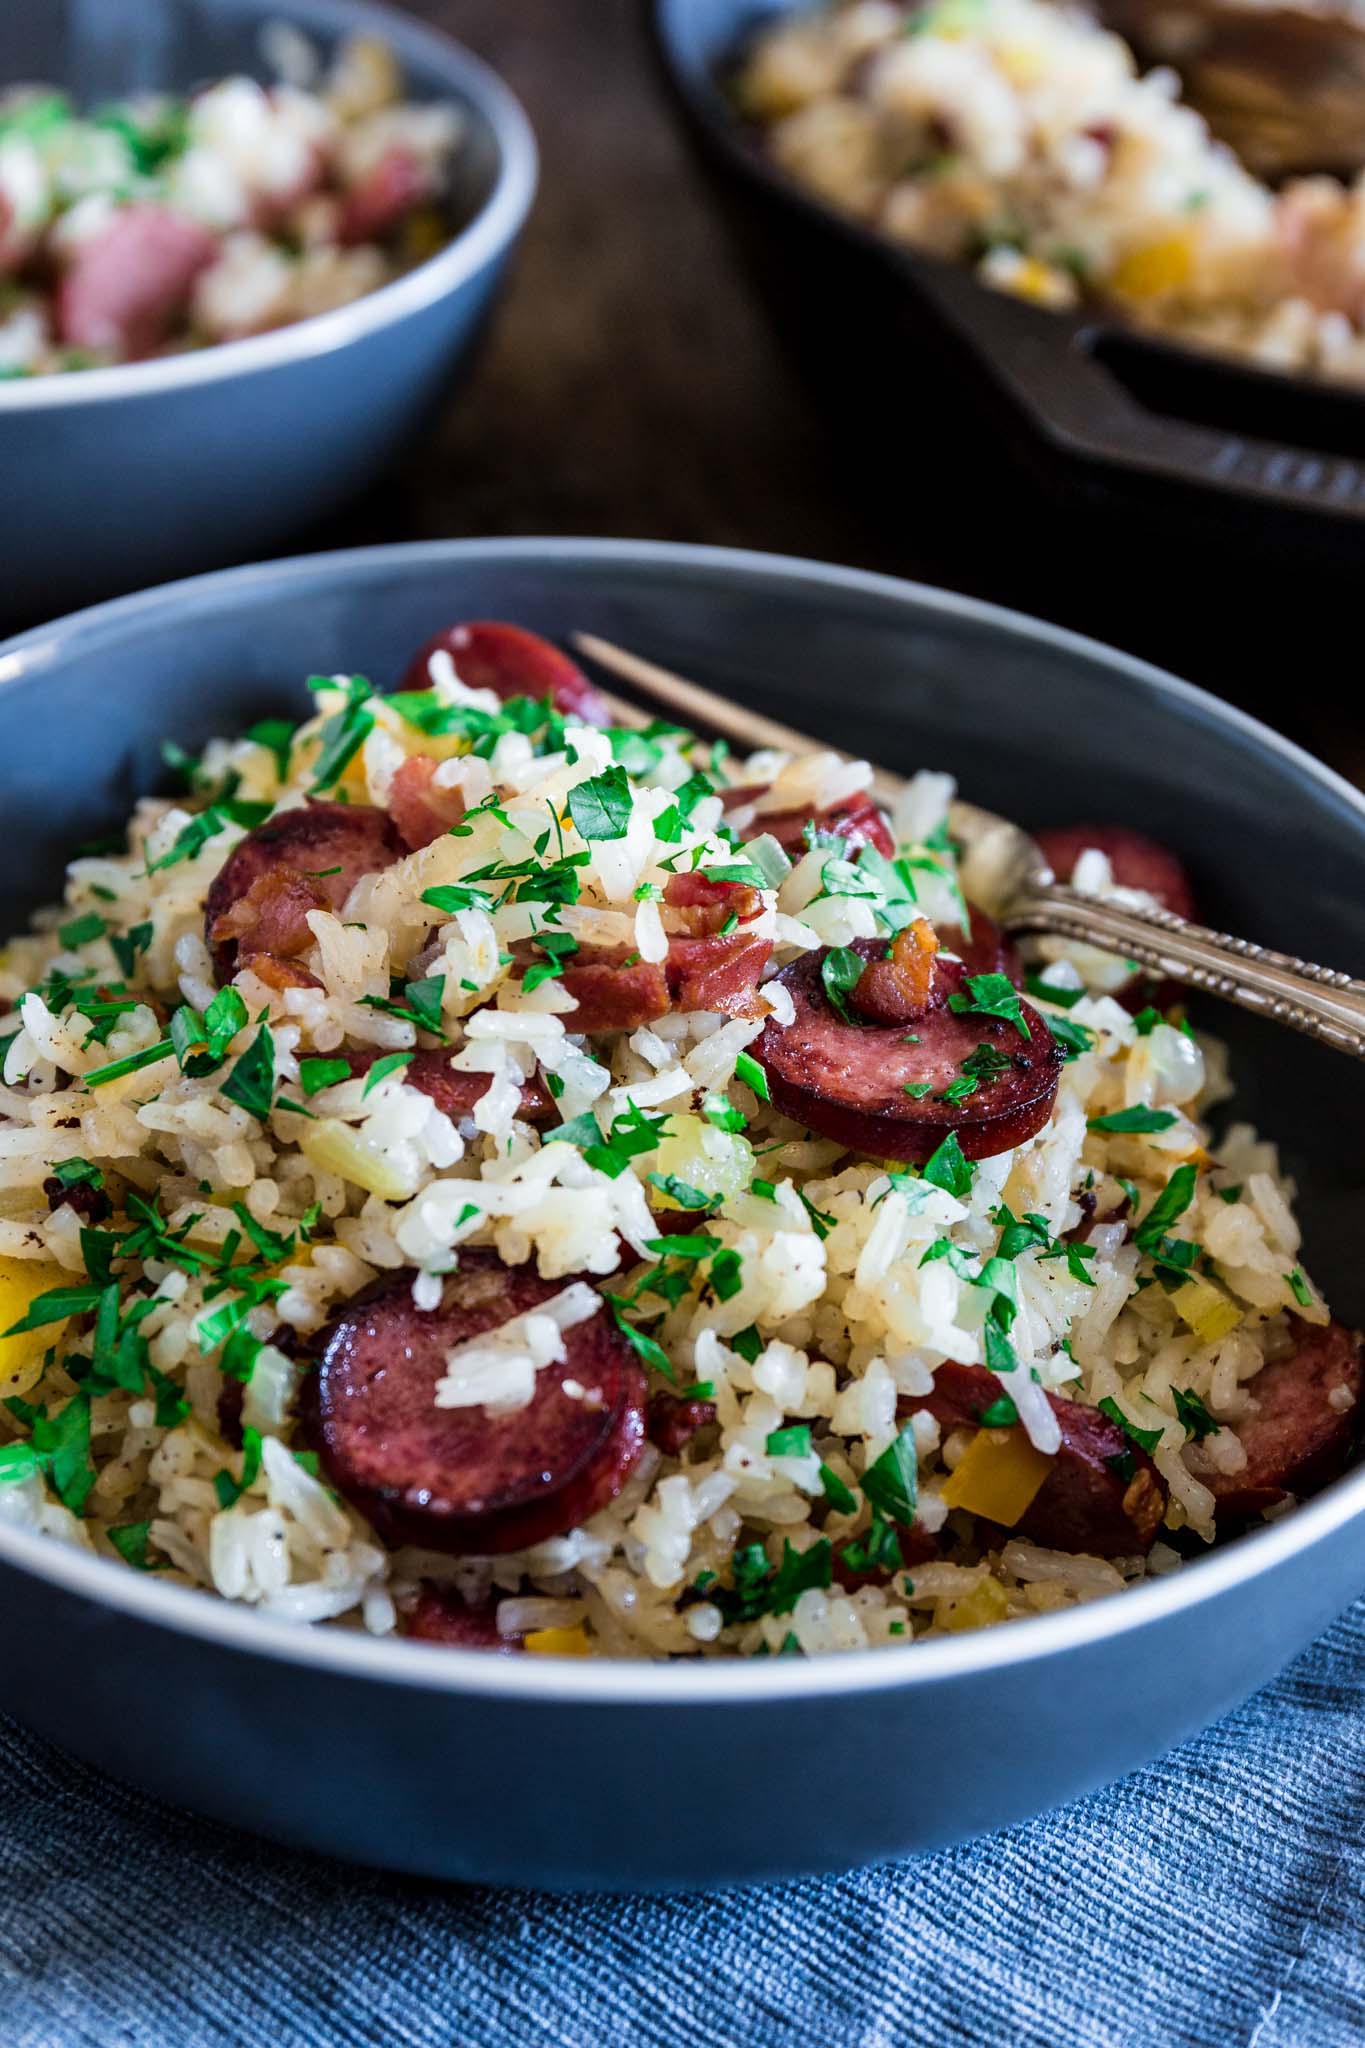 Dirty Rice with Smoked Sausage and Bacon | www.oliviascuisine.com | This spin on the classic Cajun/Creole Dirty Rice is made with bacon and smoked sausage instead of the traditional chicken liver. Easy, hearty and perfect as a weeknight meal or as a side dish for a special occasion, like Thanksgiving! (Recipe and Food Photography by @oliviascuisine.)